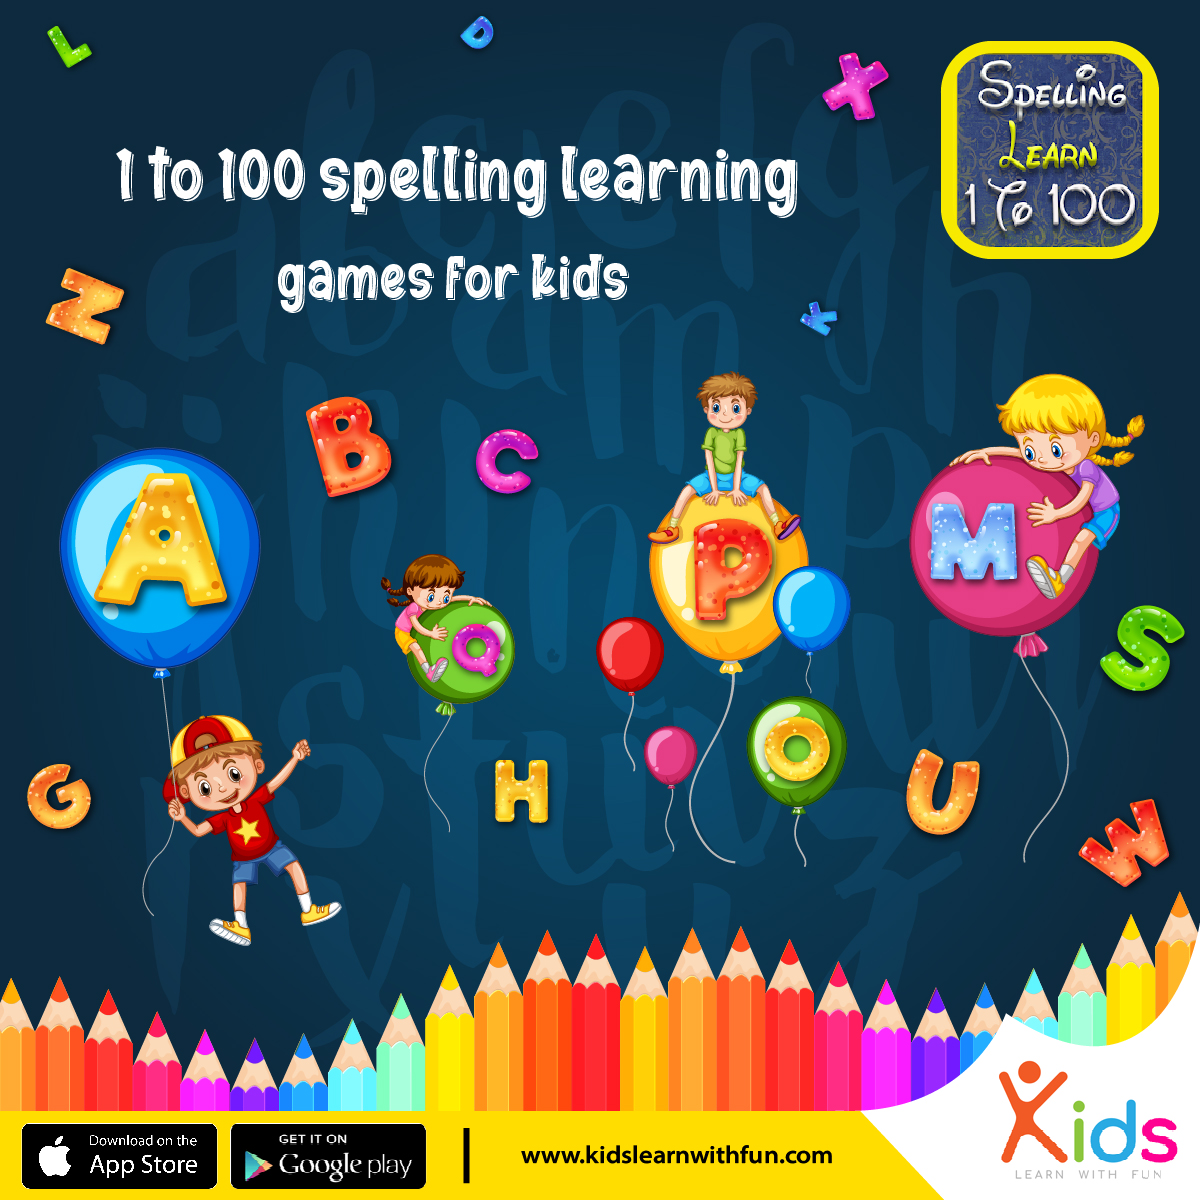 1 to 100 #spelling learning : #games for #kids
play.google.com/store/apps/det…
#spellinglearning #kidsgame #spellinggame #learninggame #improvepower #spellingword #practiceword #boardgames #IQTraining #classroom #KidsLearnWithFun #kidsproblem #kidseducation #learninggame #spellingggame